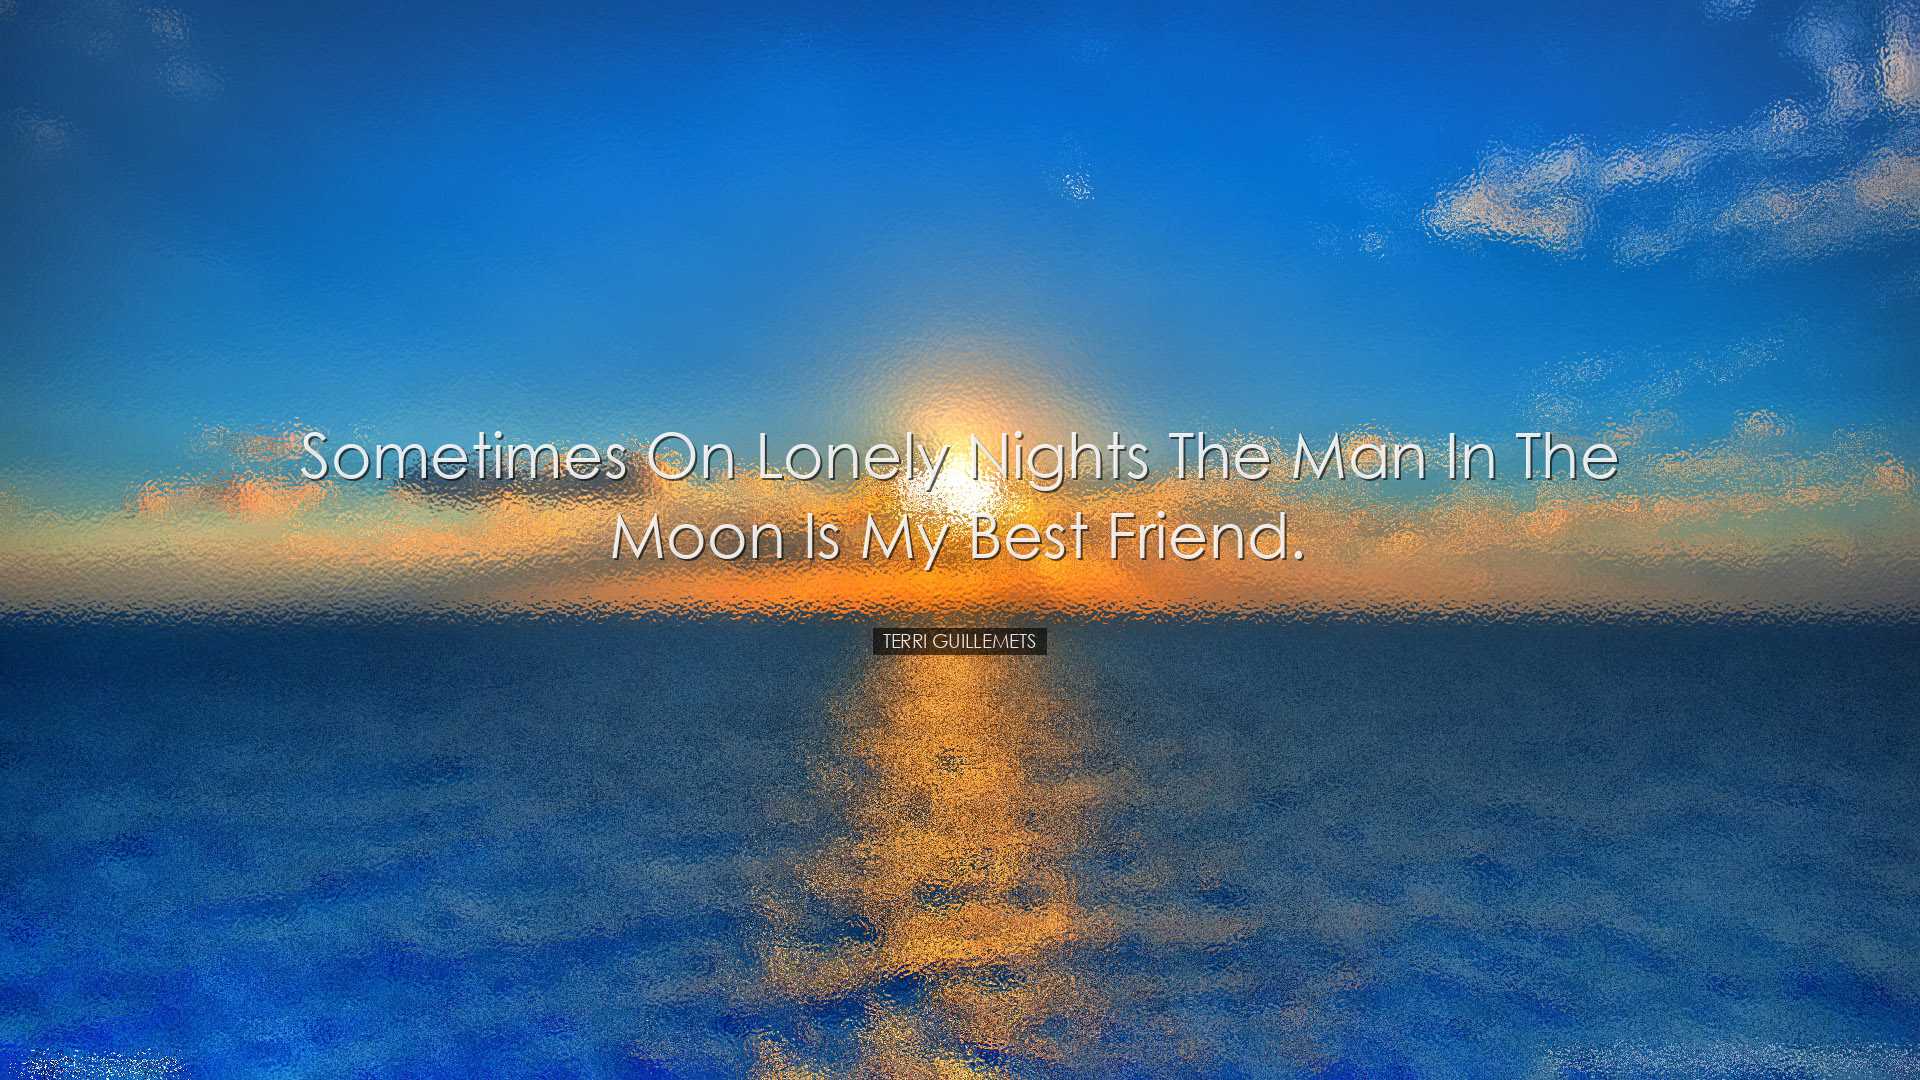 Sometimes on lonely nights the man in the moon is my best friend.